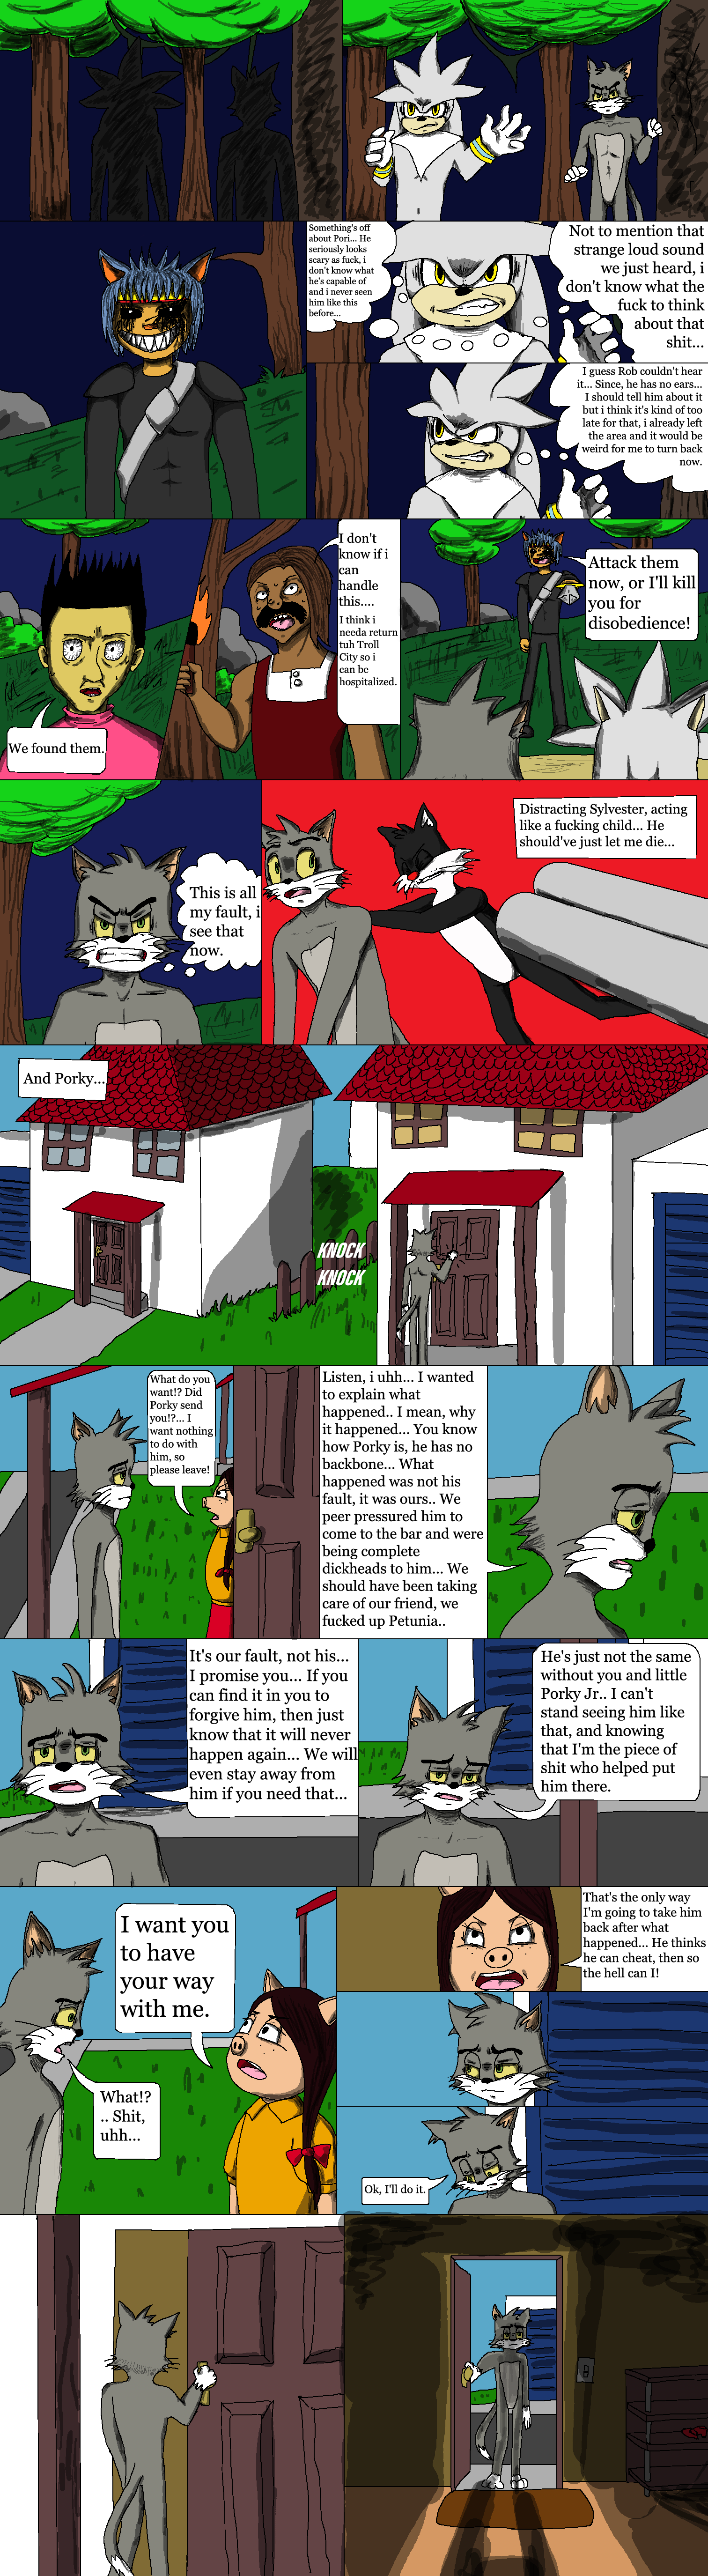 ch25.5/pg19.png. If you're seeing this, enable images. Or, perhaps we have a website issue. Try refreshing, if unsuccessful email commodorian@tailsgetstrolled.org with a detailed description of how you got here.